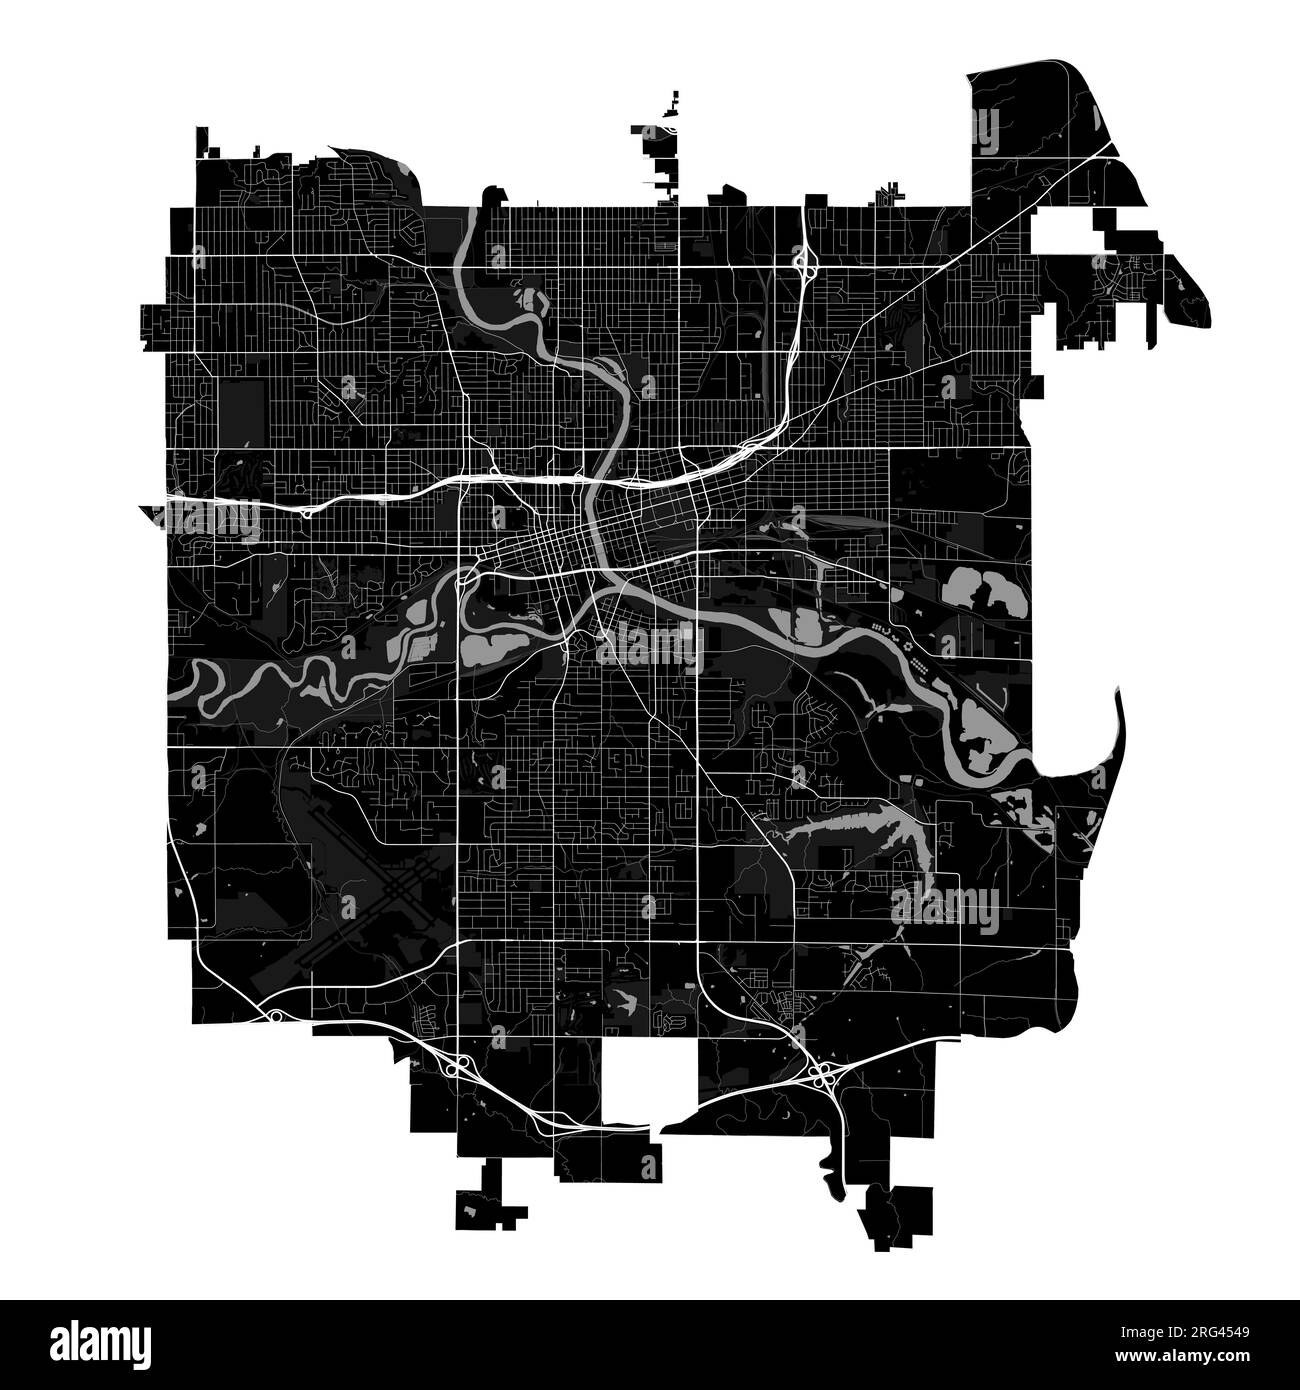 Des Moines city map, capital of the USA state of Iowa. Municipal administrative borders, black and white area map with rivers and roads, parks and rai Stock Vector